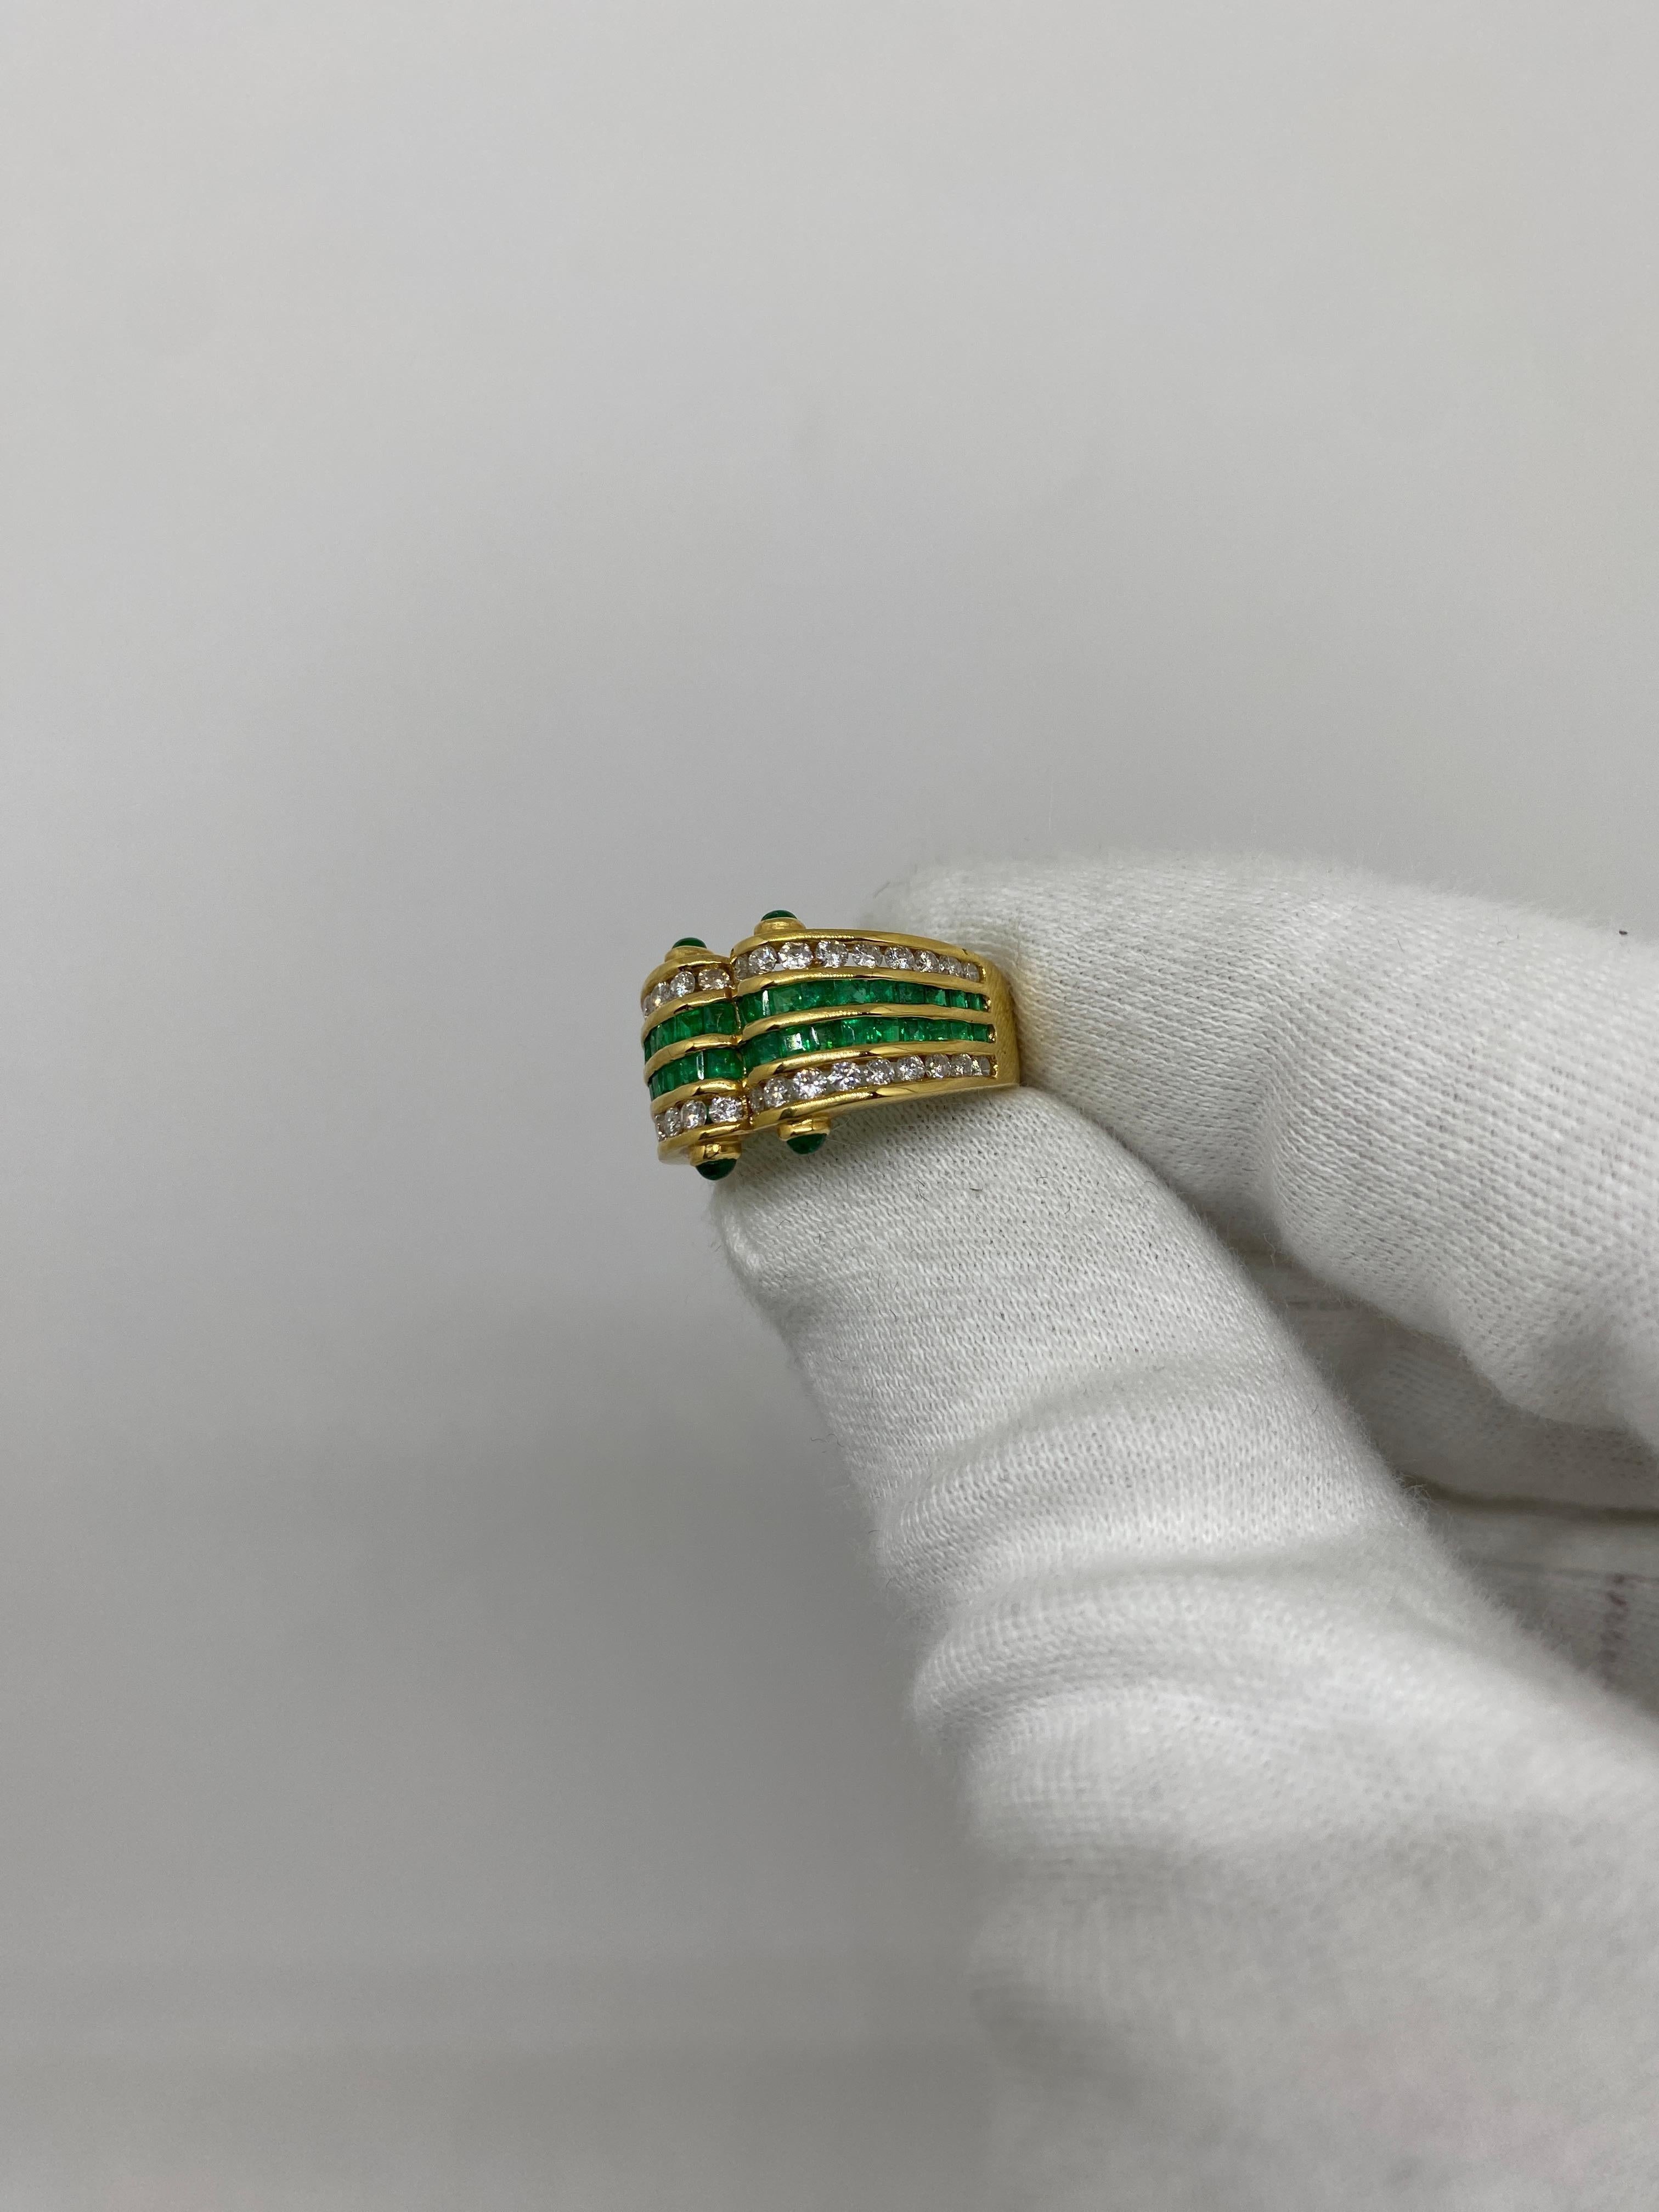 Ring made of 18kt yellow gold with natural cored-cut diamonds and cabochon-cut emeralds

Welcome to our jewelry collection, where every piece tells a story of timeless elegance and unparalleled craftsmanship. As a family-run business in Italy for